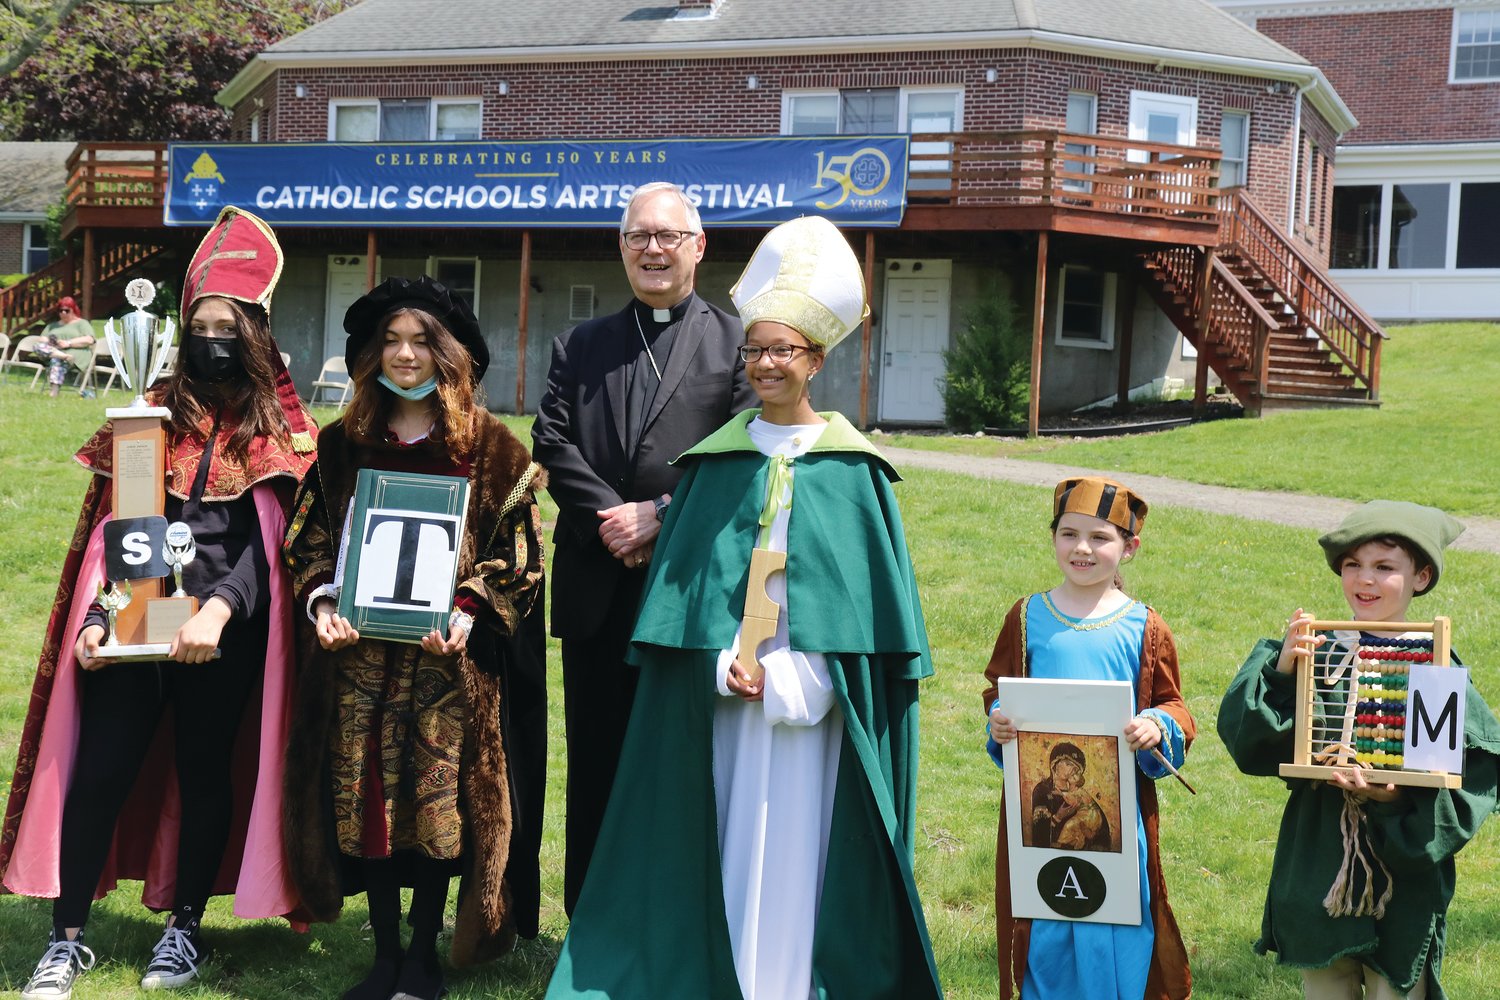 Bishop Thomas J. Tobin gathers with the Saints of S.T.E.A.M., from All Saints Academy: from left, Francesca Vidotto, grade 7; Trinity Maghuyop, grade 7; Ava Wiggins, grade 5; Rosemary McStravick, Kindergarten; Frank Long, Pre-K.